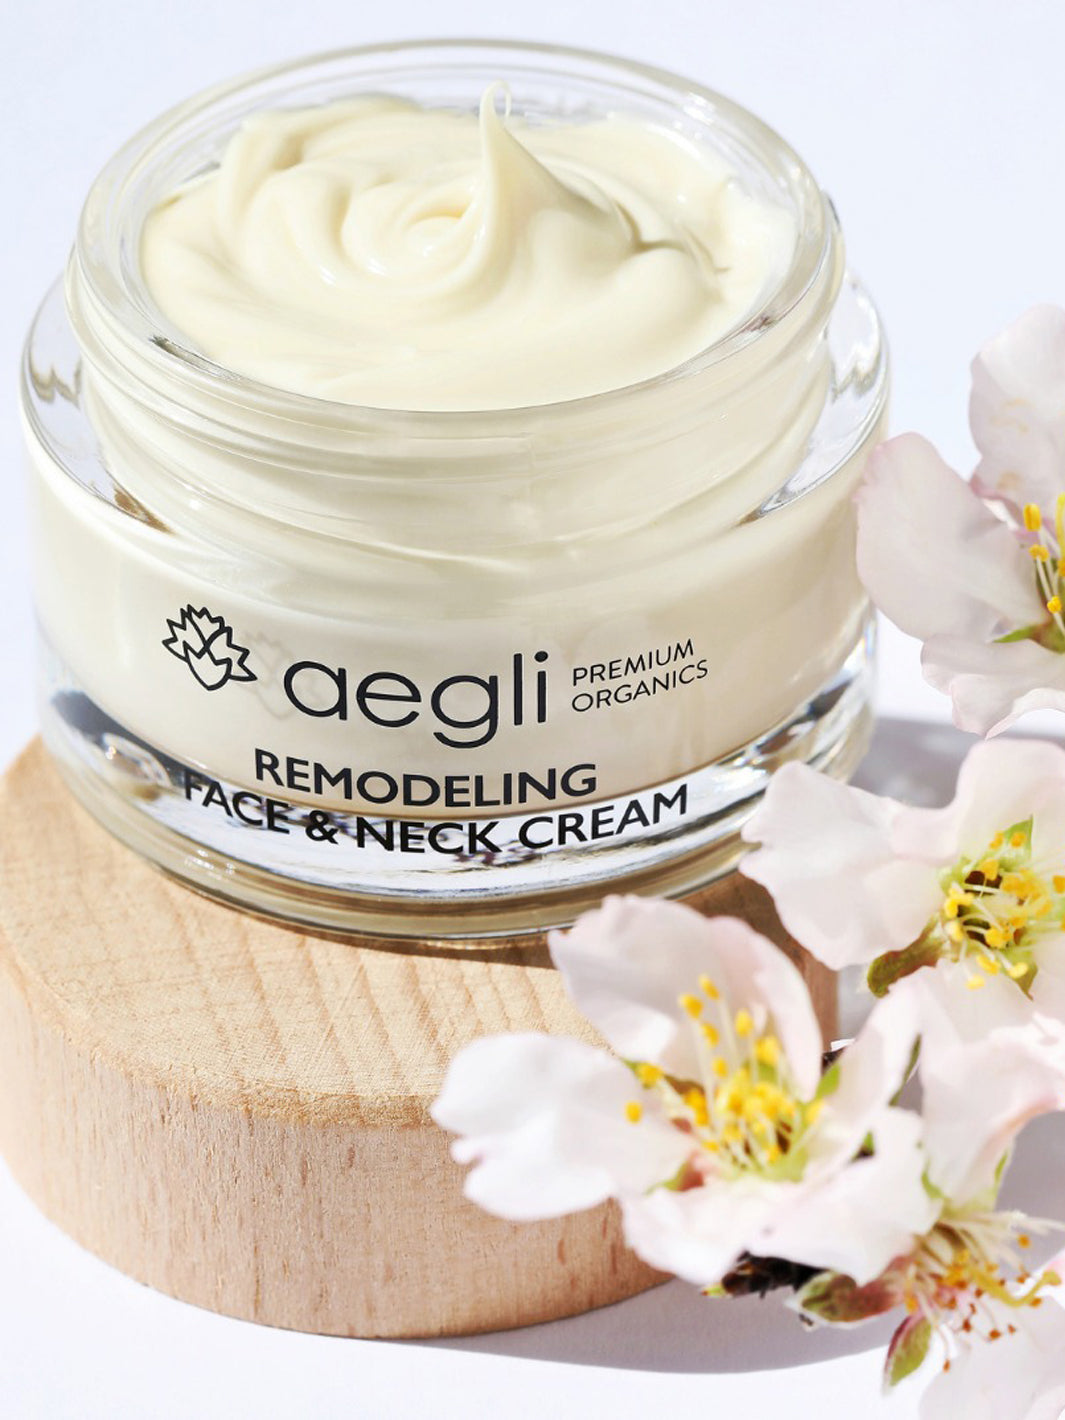 Remodeling Face & Neck Cream